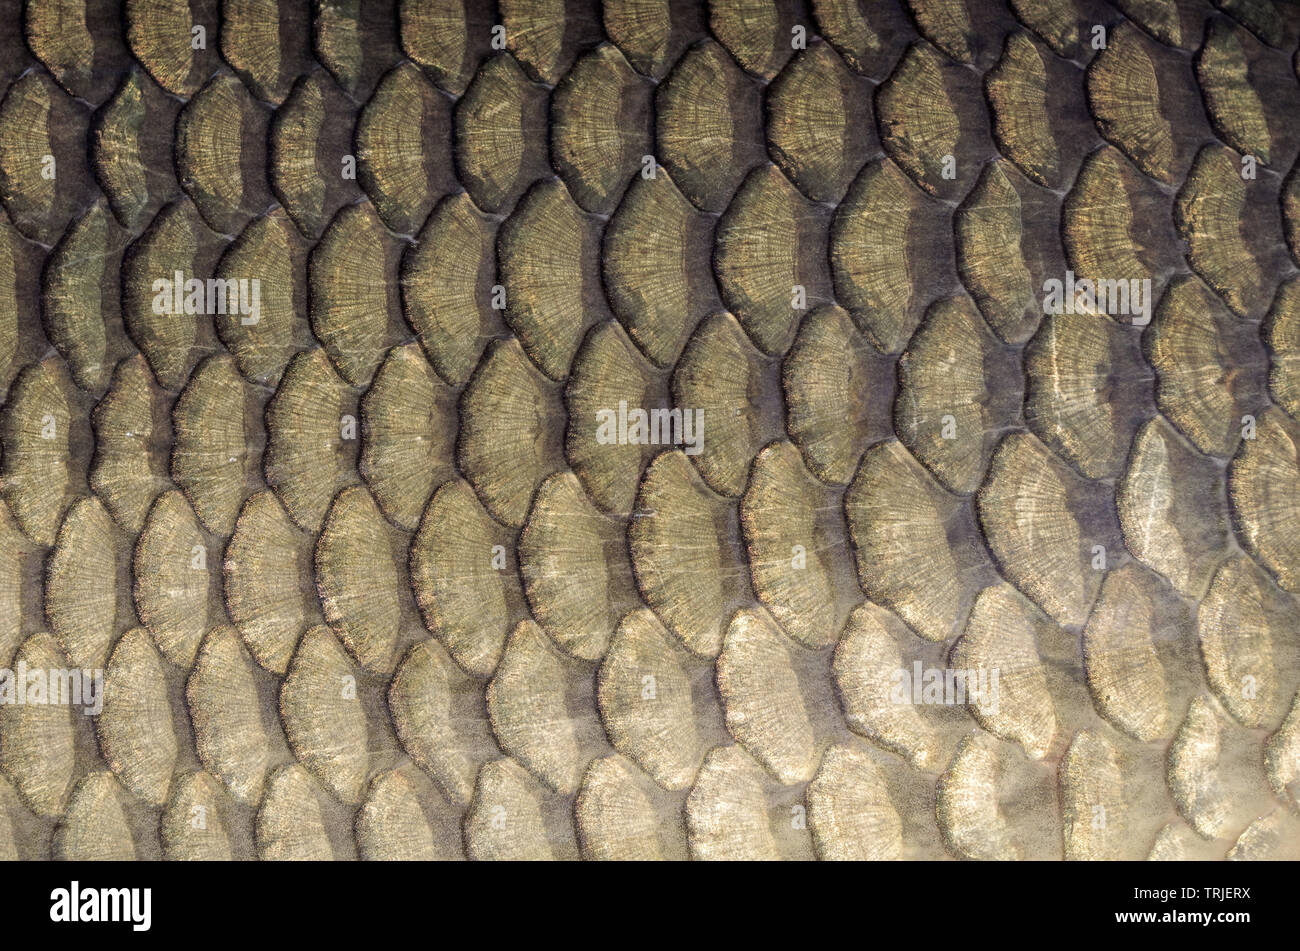 Silver carp scales background. Close-up on carp scales Stock Photo